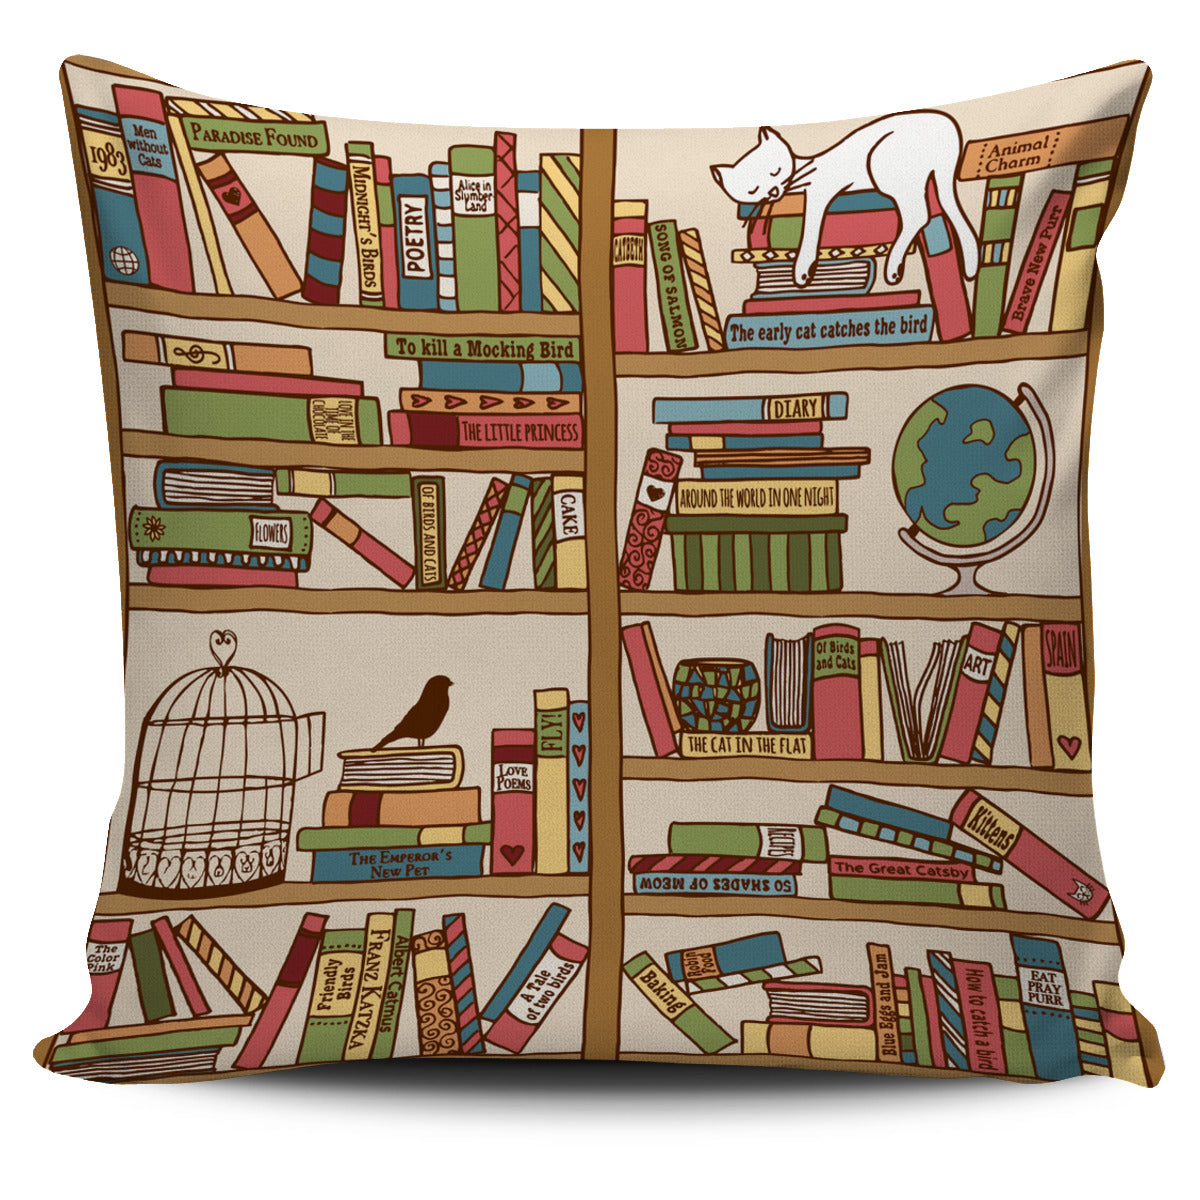 Purrrfect Books Pillow Cover